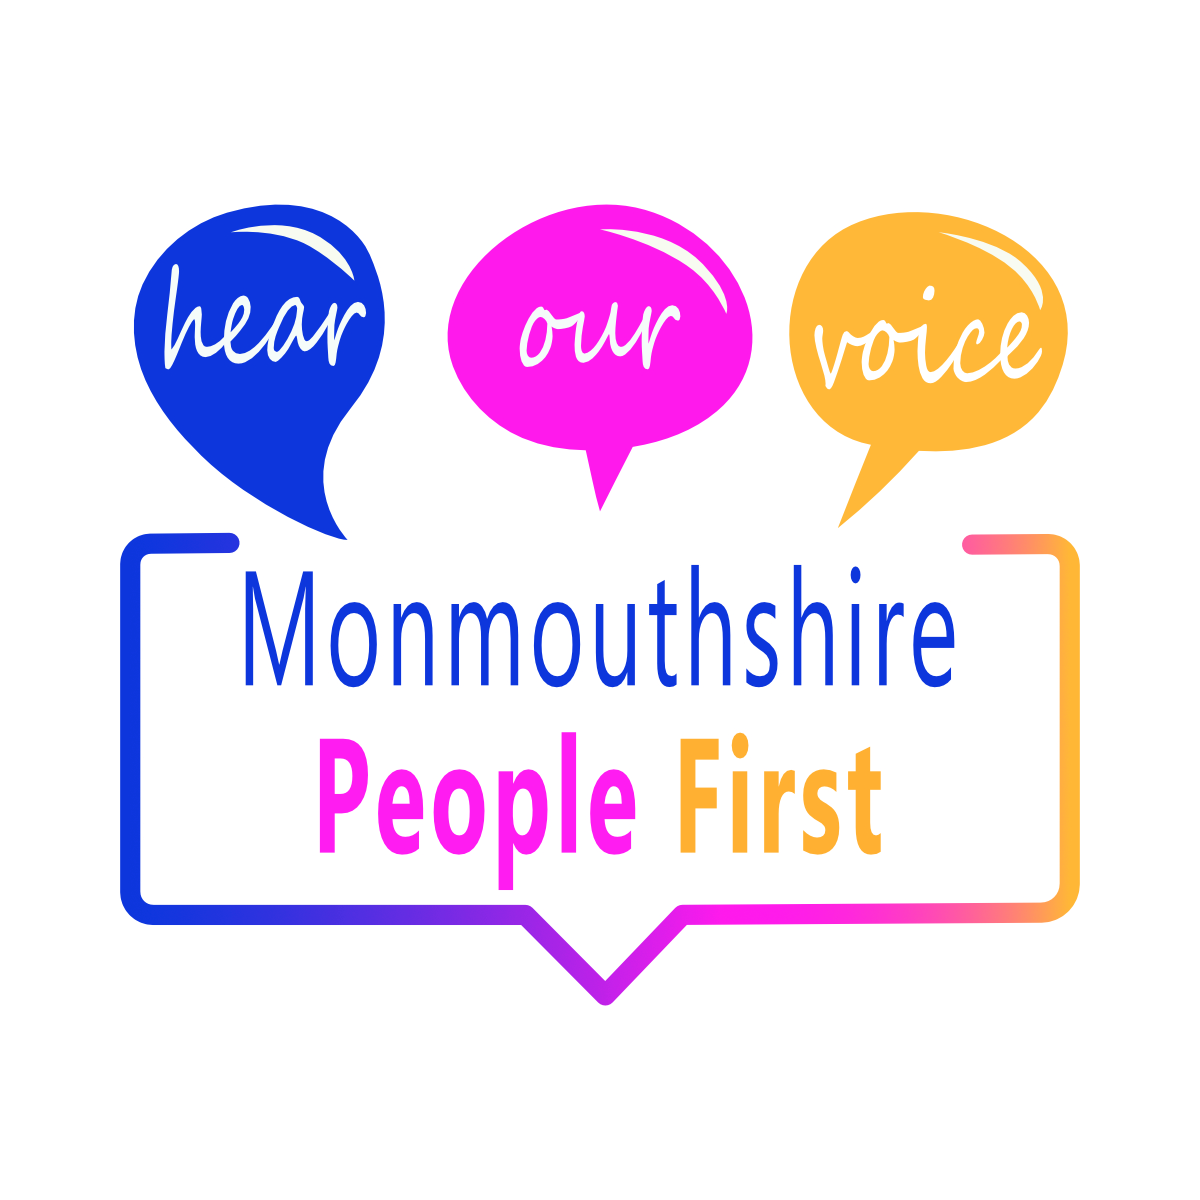 Monmouthshire People First logo